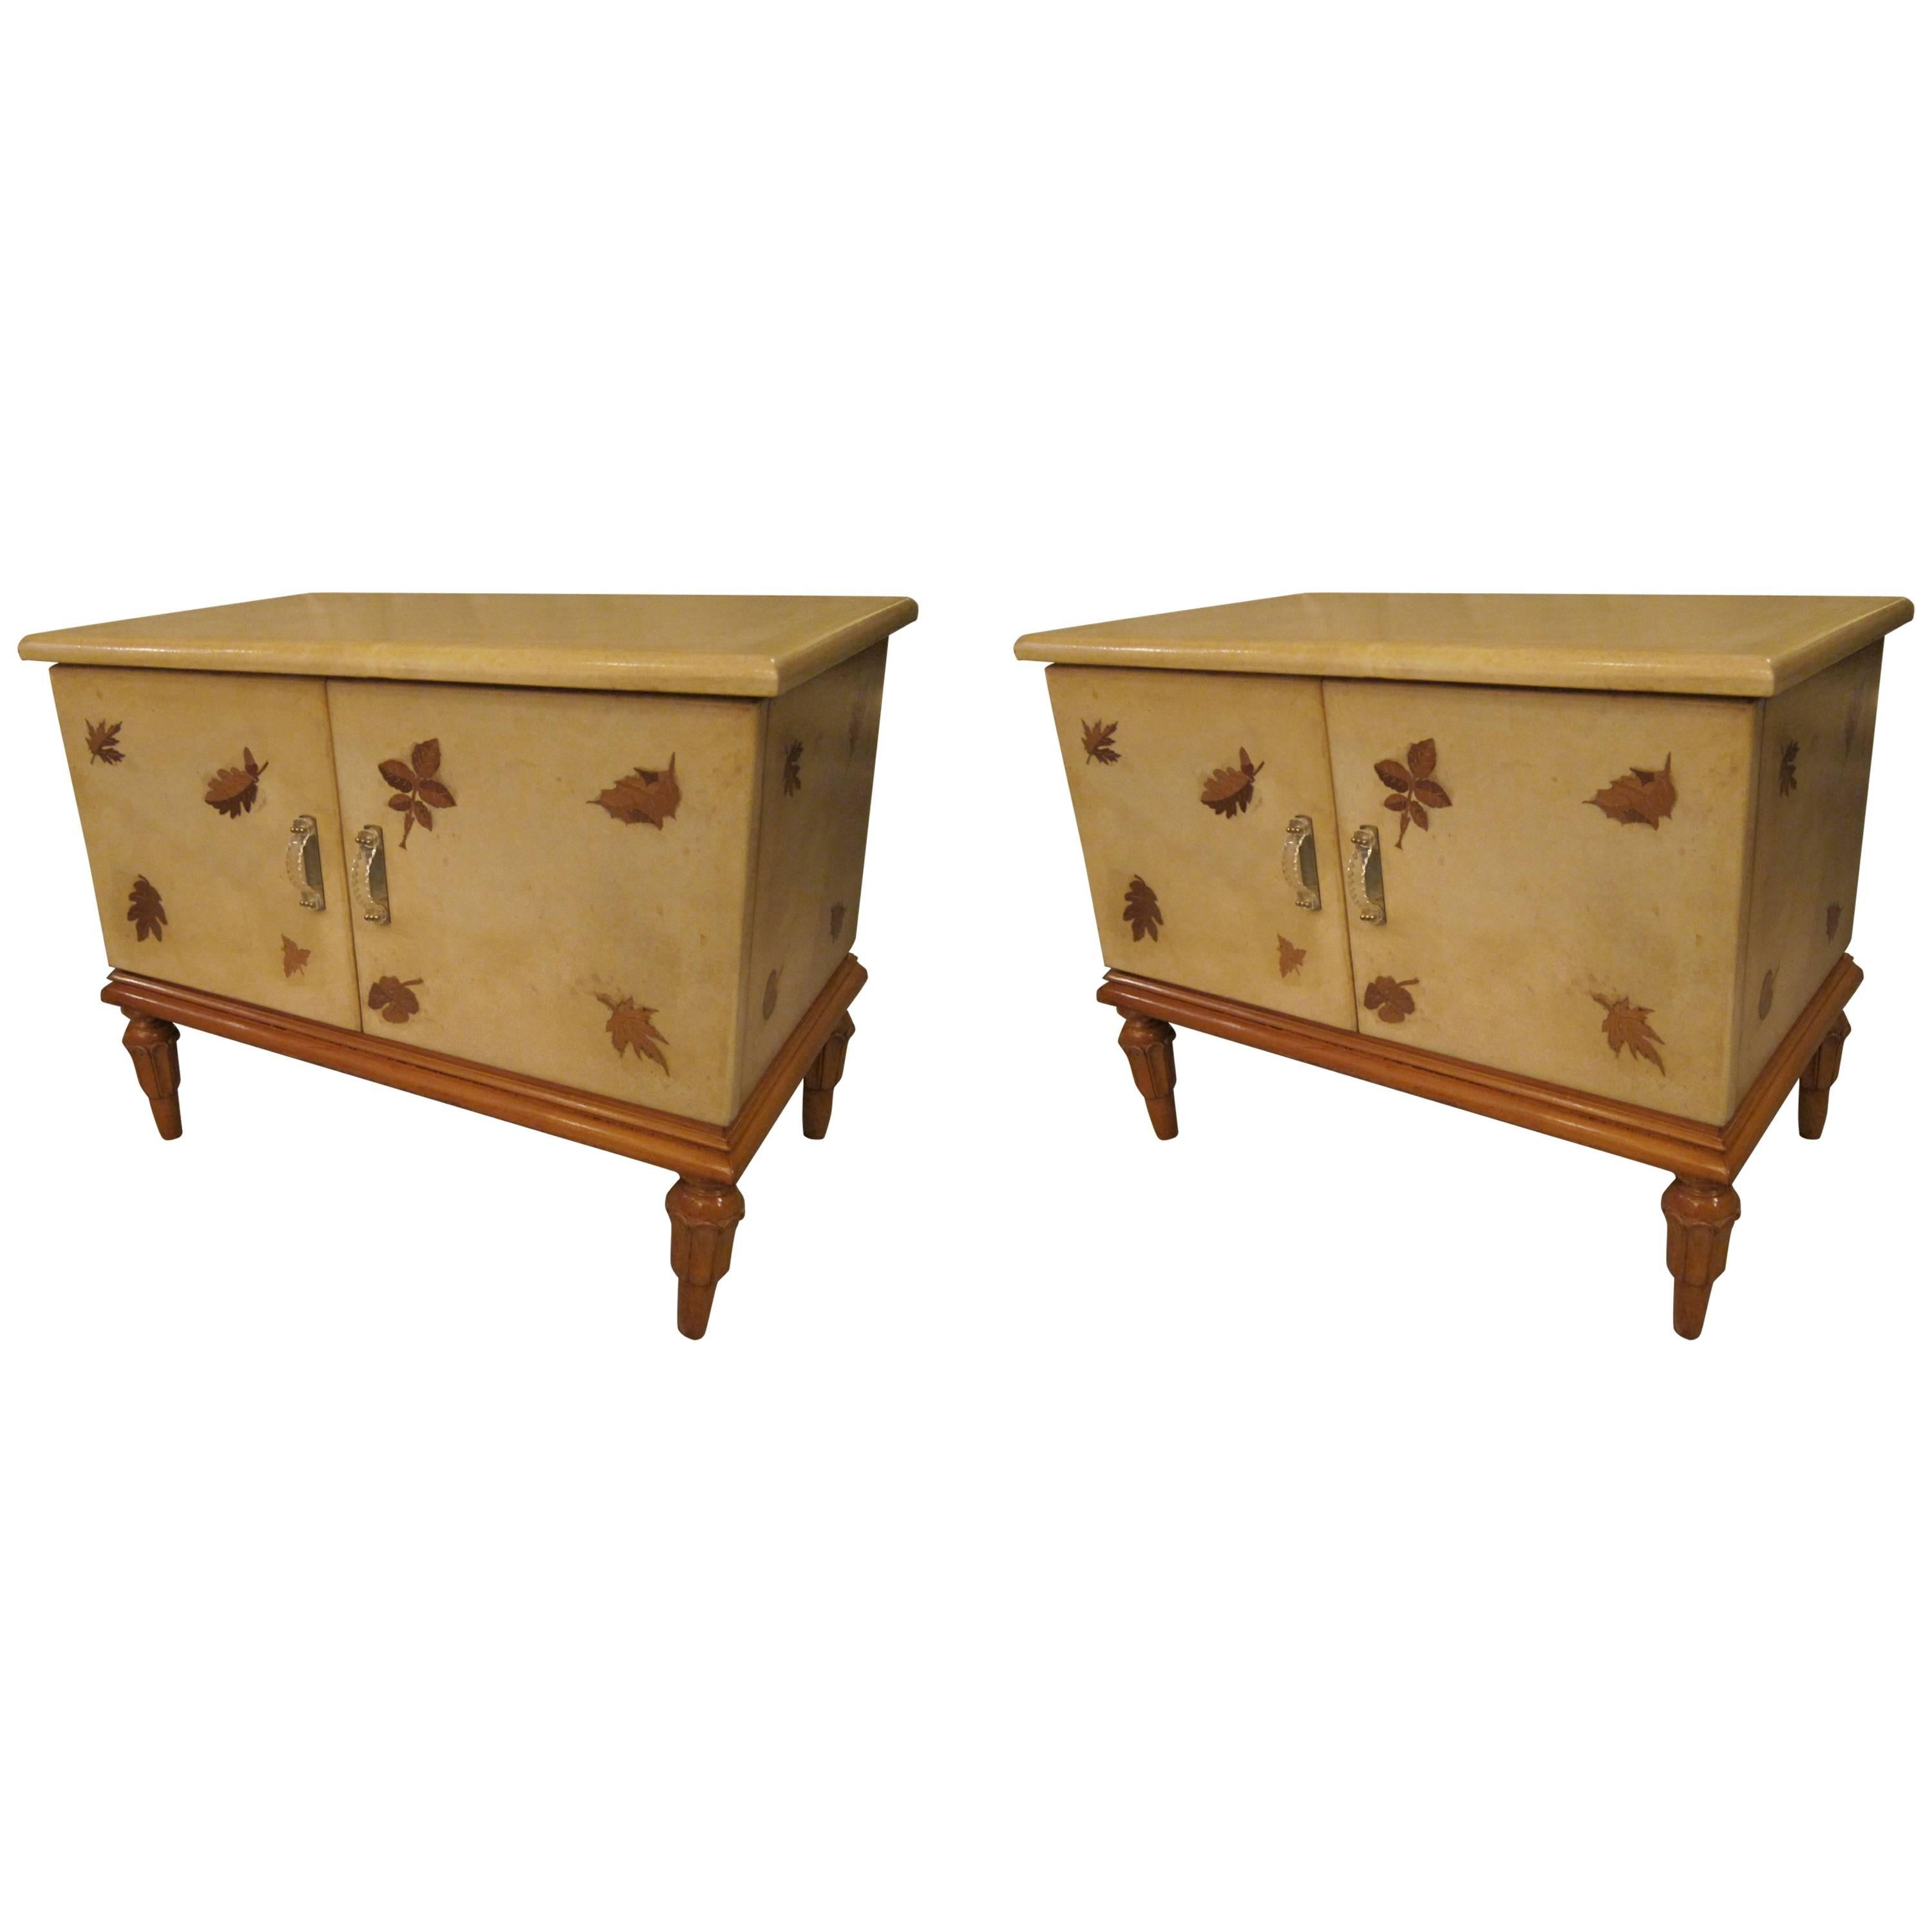 Giuseppe Anzani Pair of Lacquered Parchment Chests of Drawers, Italy, 1950 For Sale